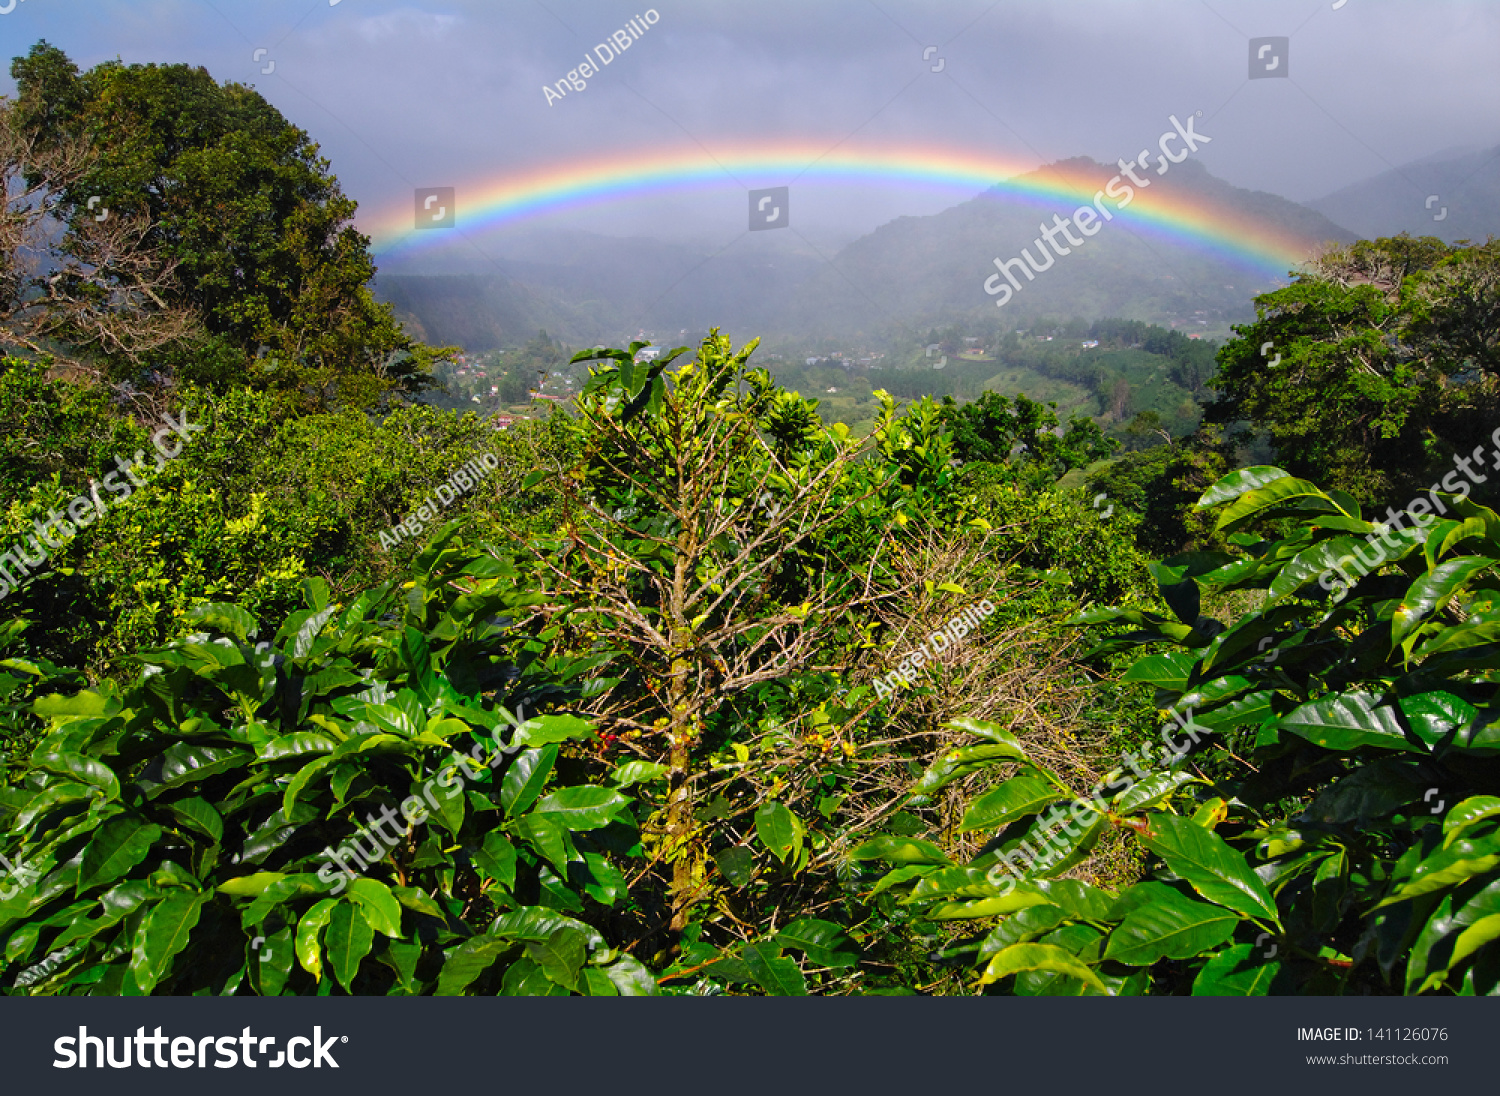 Coffee Plantation and vibrant rainbow in Boquete. Rainbows and coffee plants are common in Boquete, Panama, Central America. #141126076